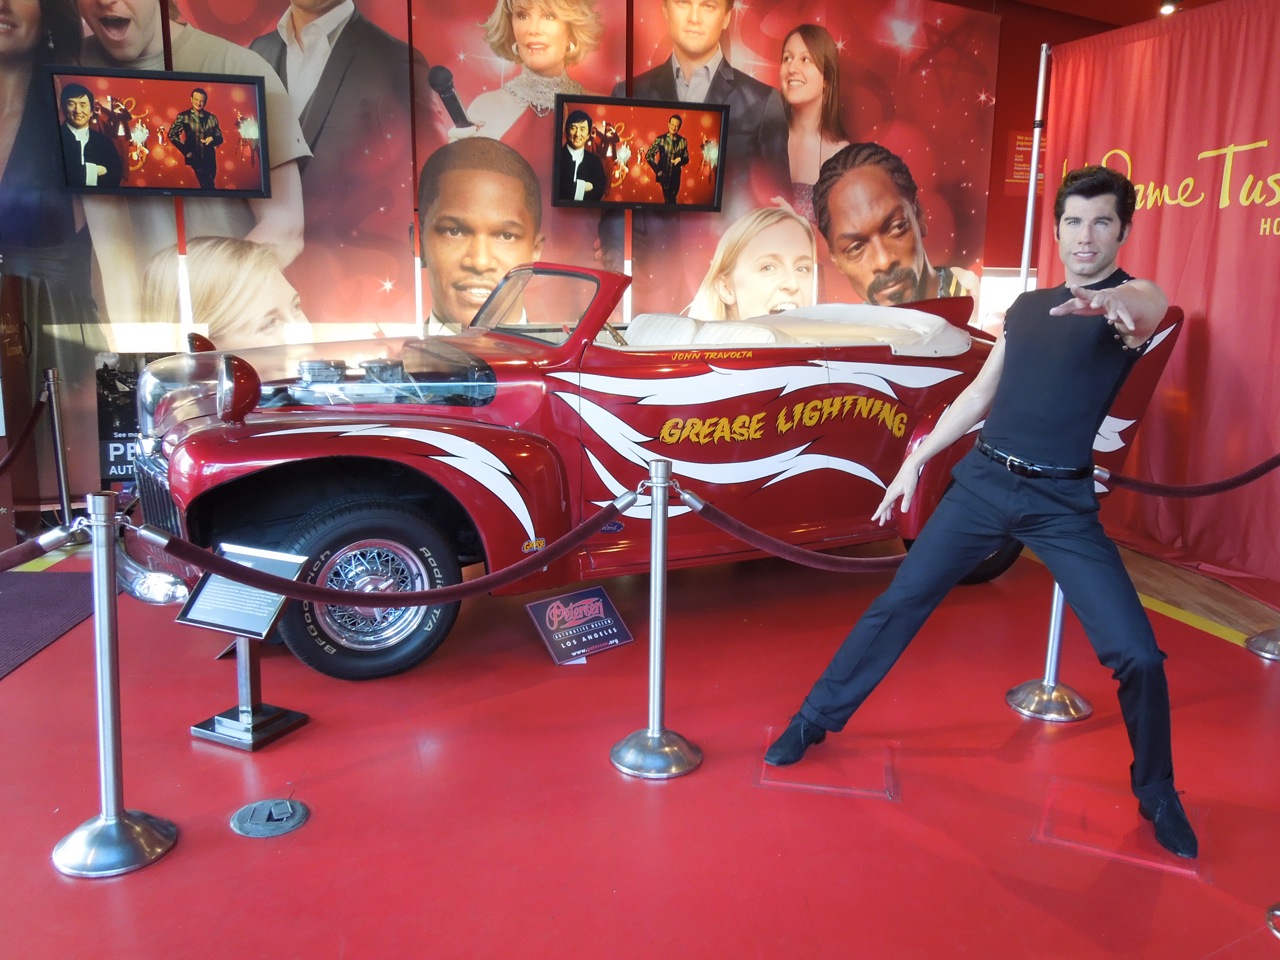 Hollywood Movie Costumes and Props: Grease Lightning car from Grease on  display...